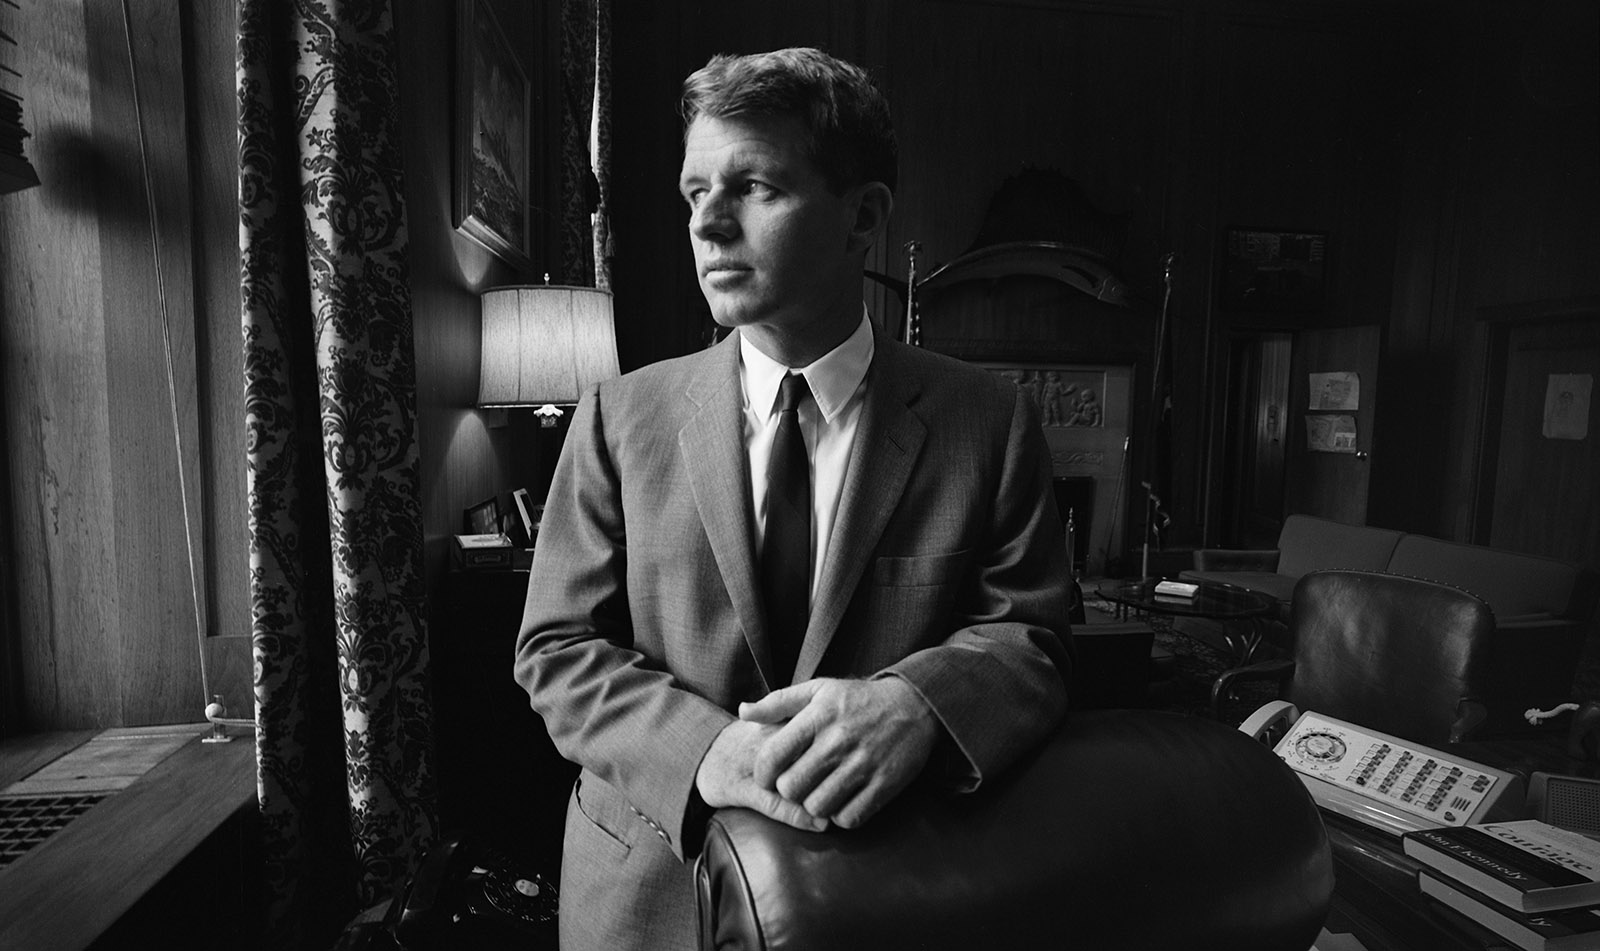 Robert F. Kennedy, then Attorney General, in his Justice Department office, circa 1964